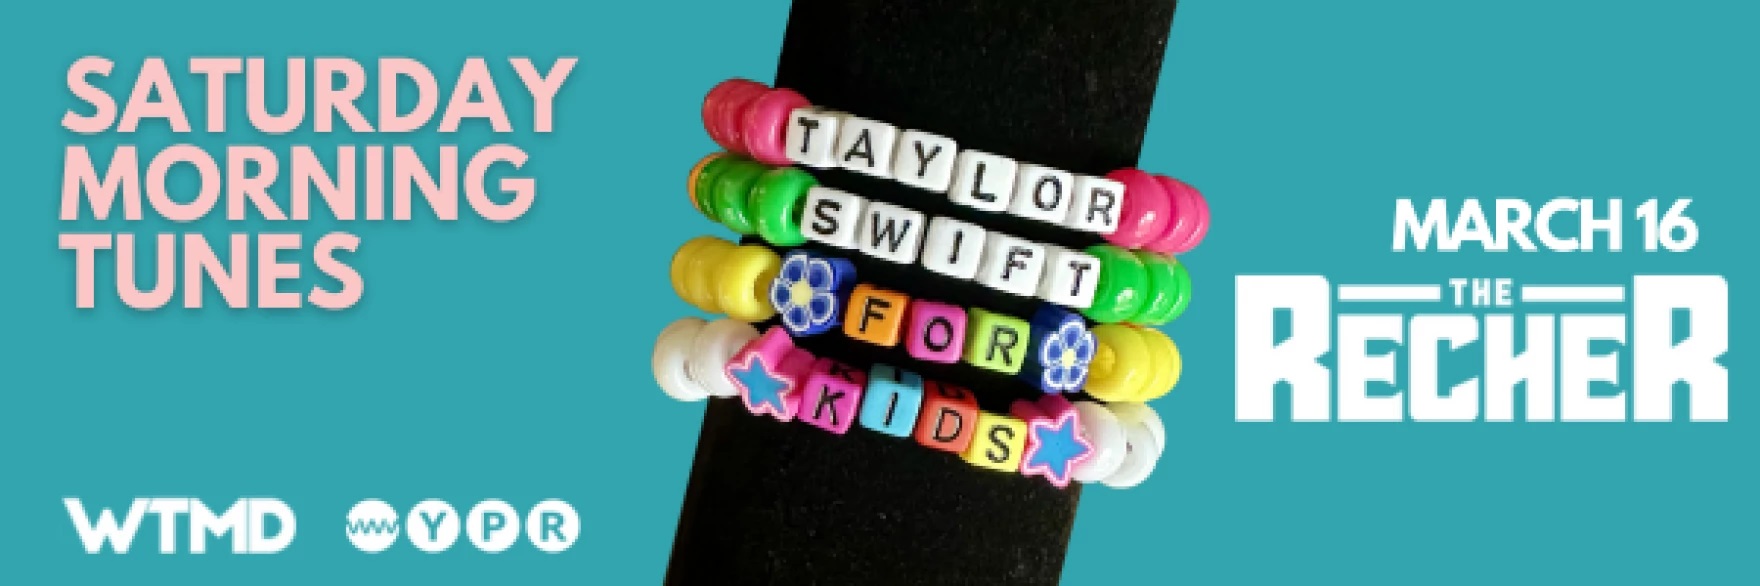 Image for Taylor Swift for Kids at The Recher webinar